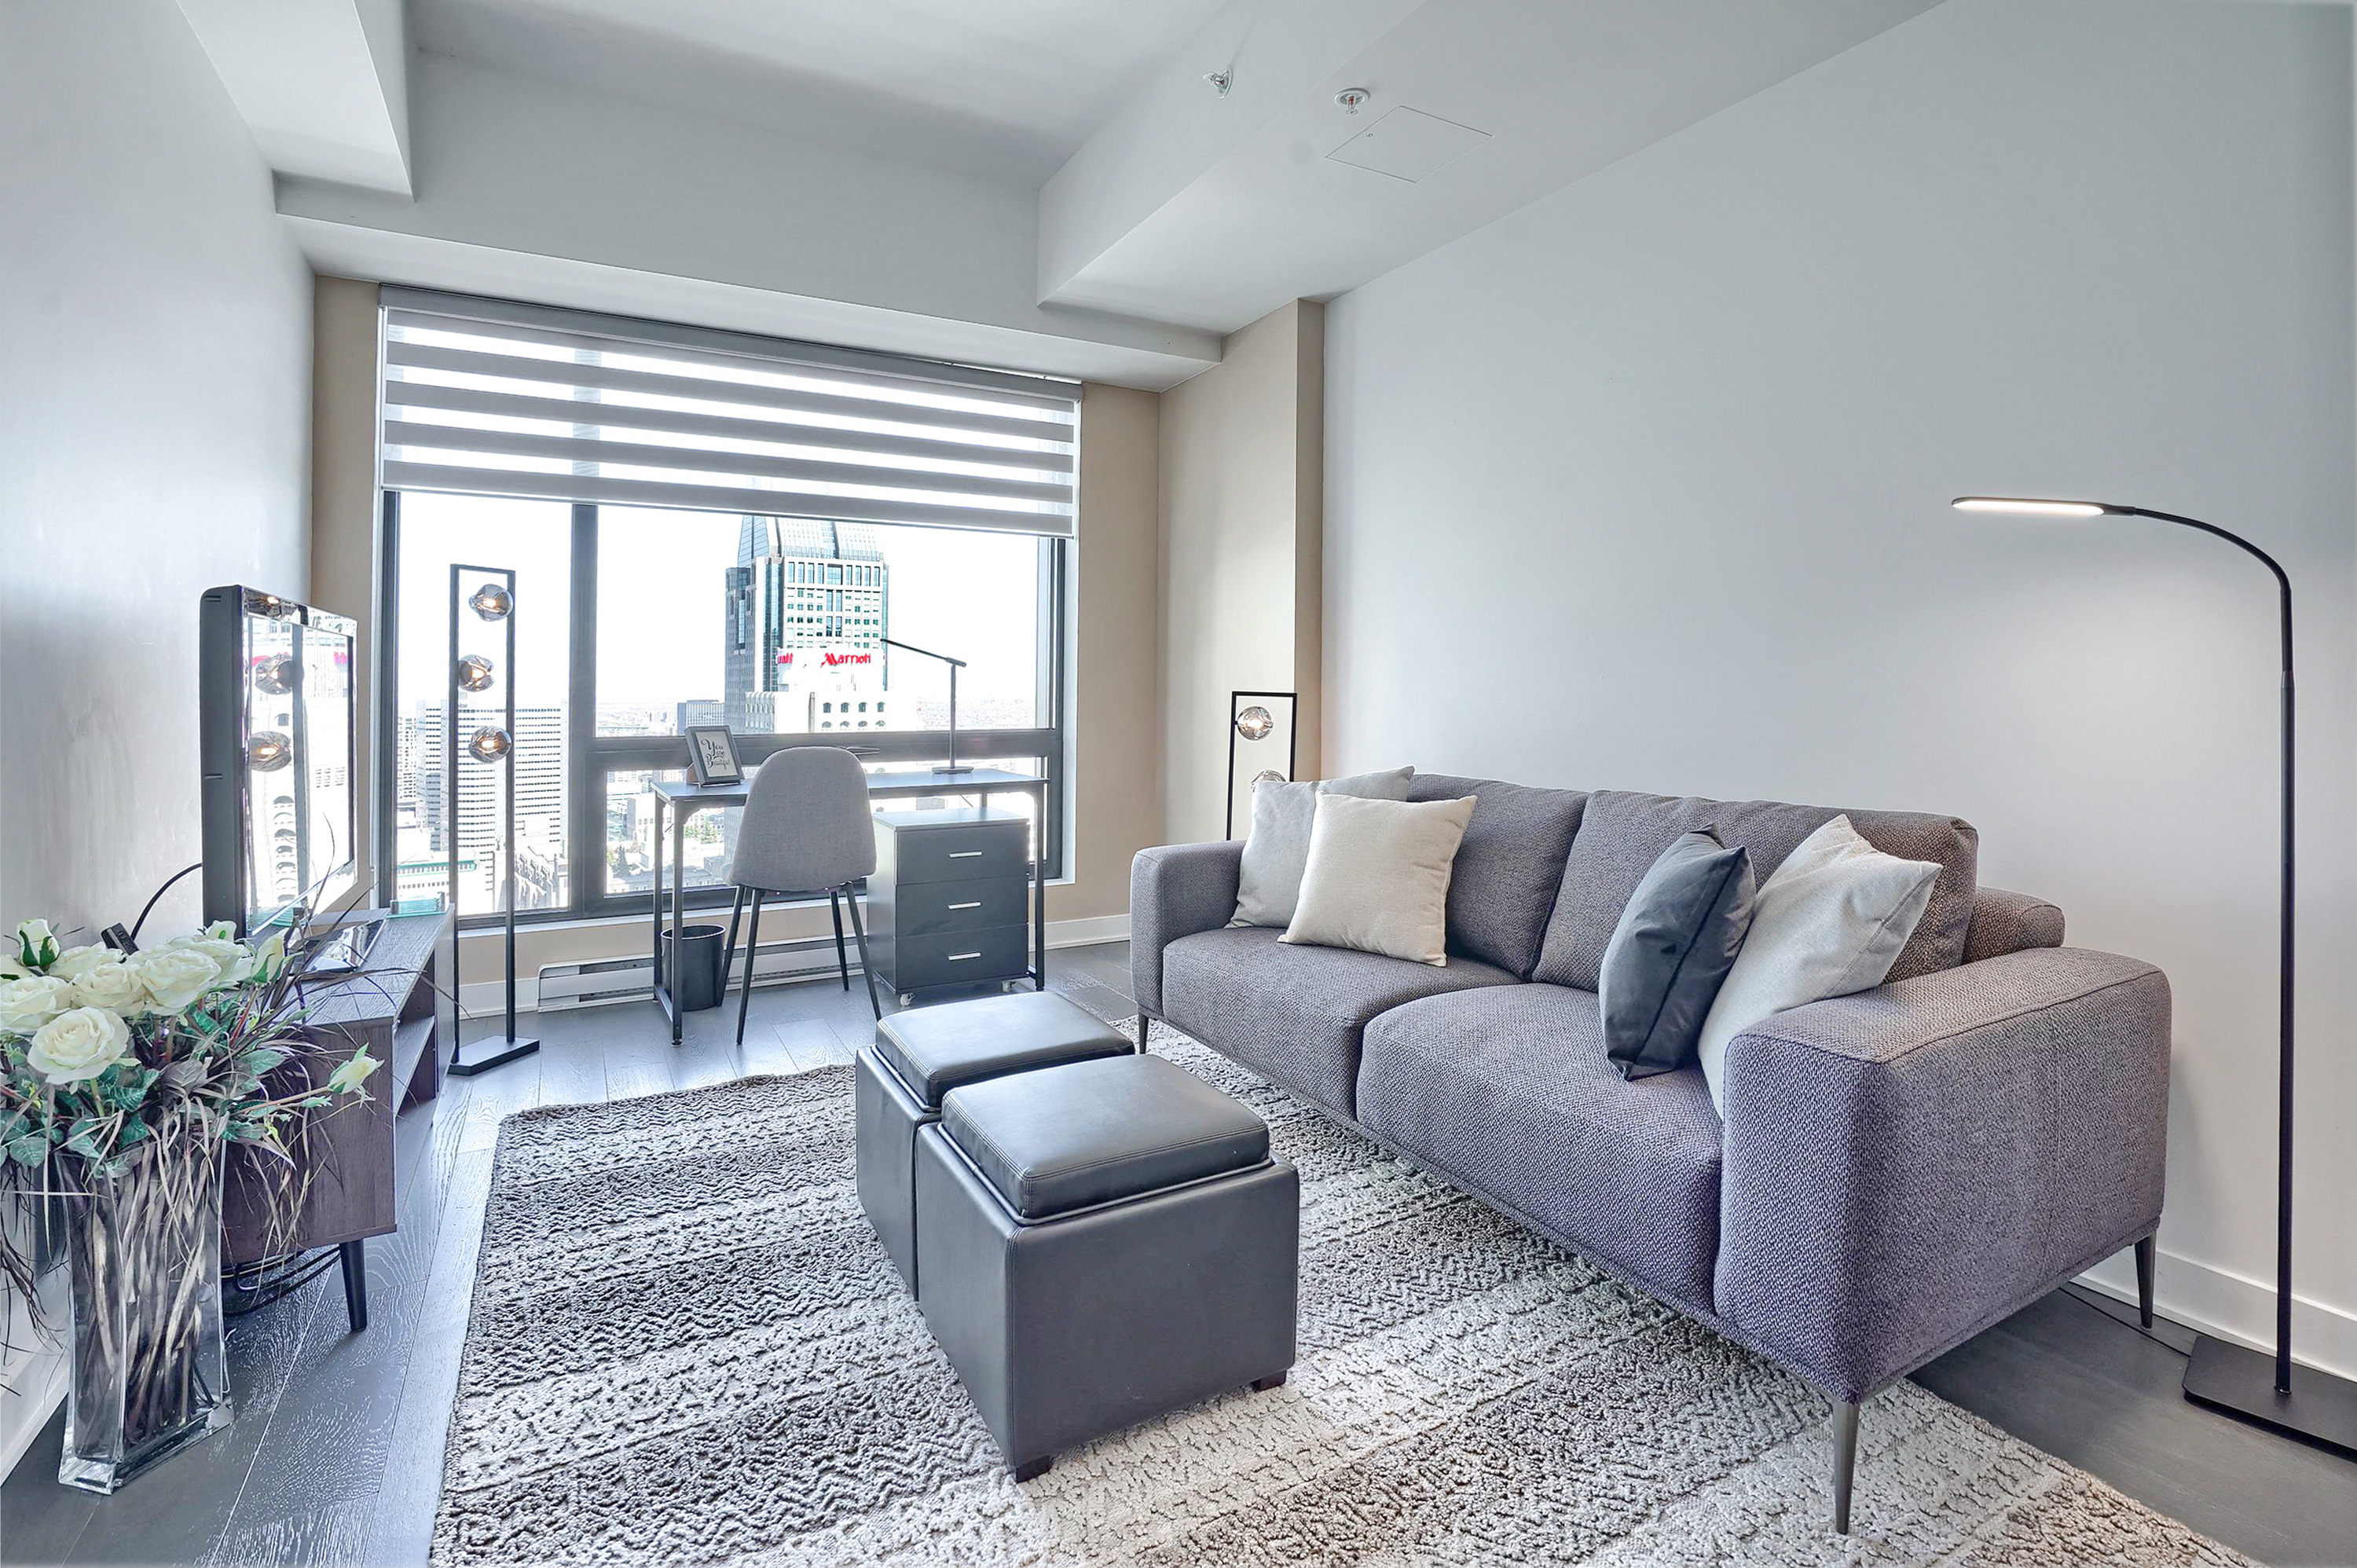 Spacious, bright, beautifully designed living area in this luxury furnished rental in montreal. Two large, floor-to-ceiling windows fills the room with sunlight. Plush leather furnishings, dining area for four, and a study desk and leather chair to match.